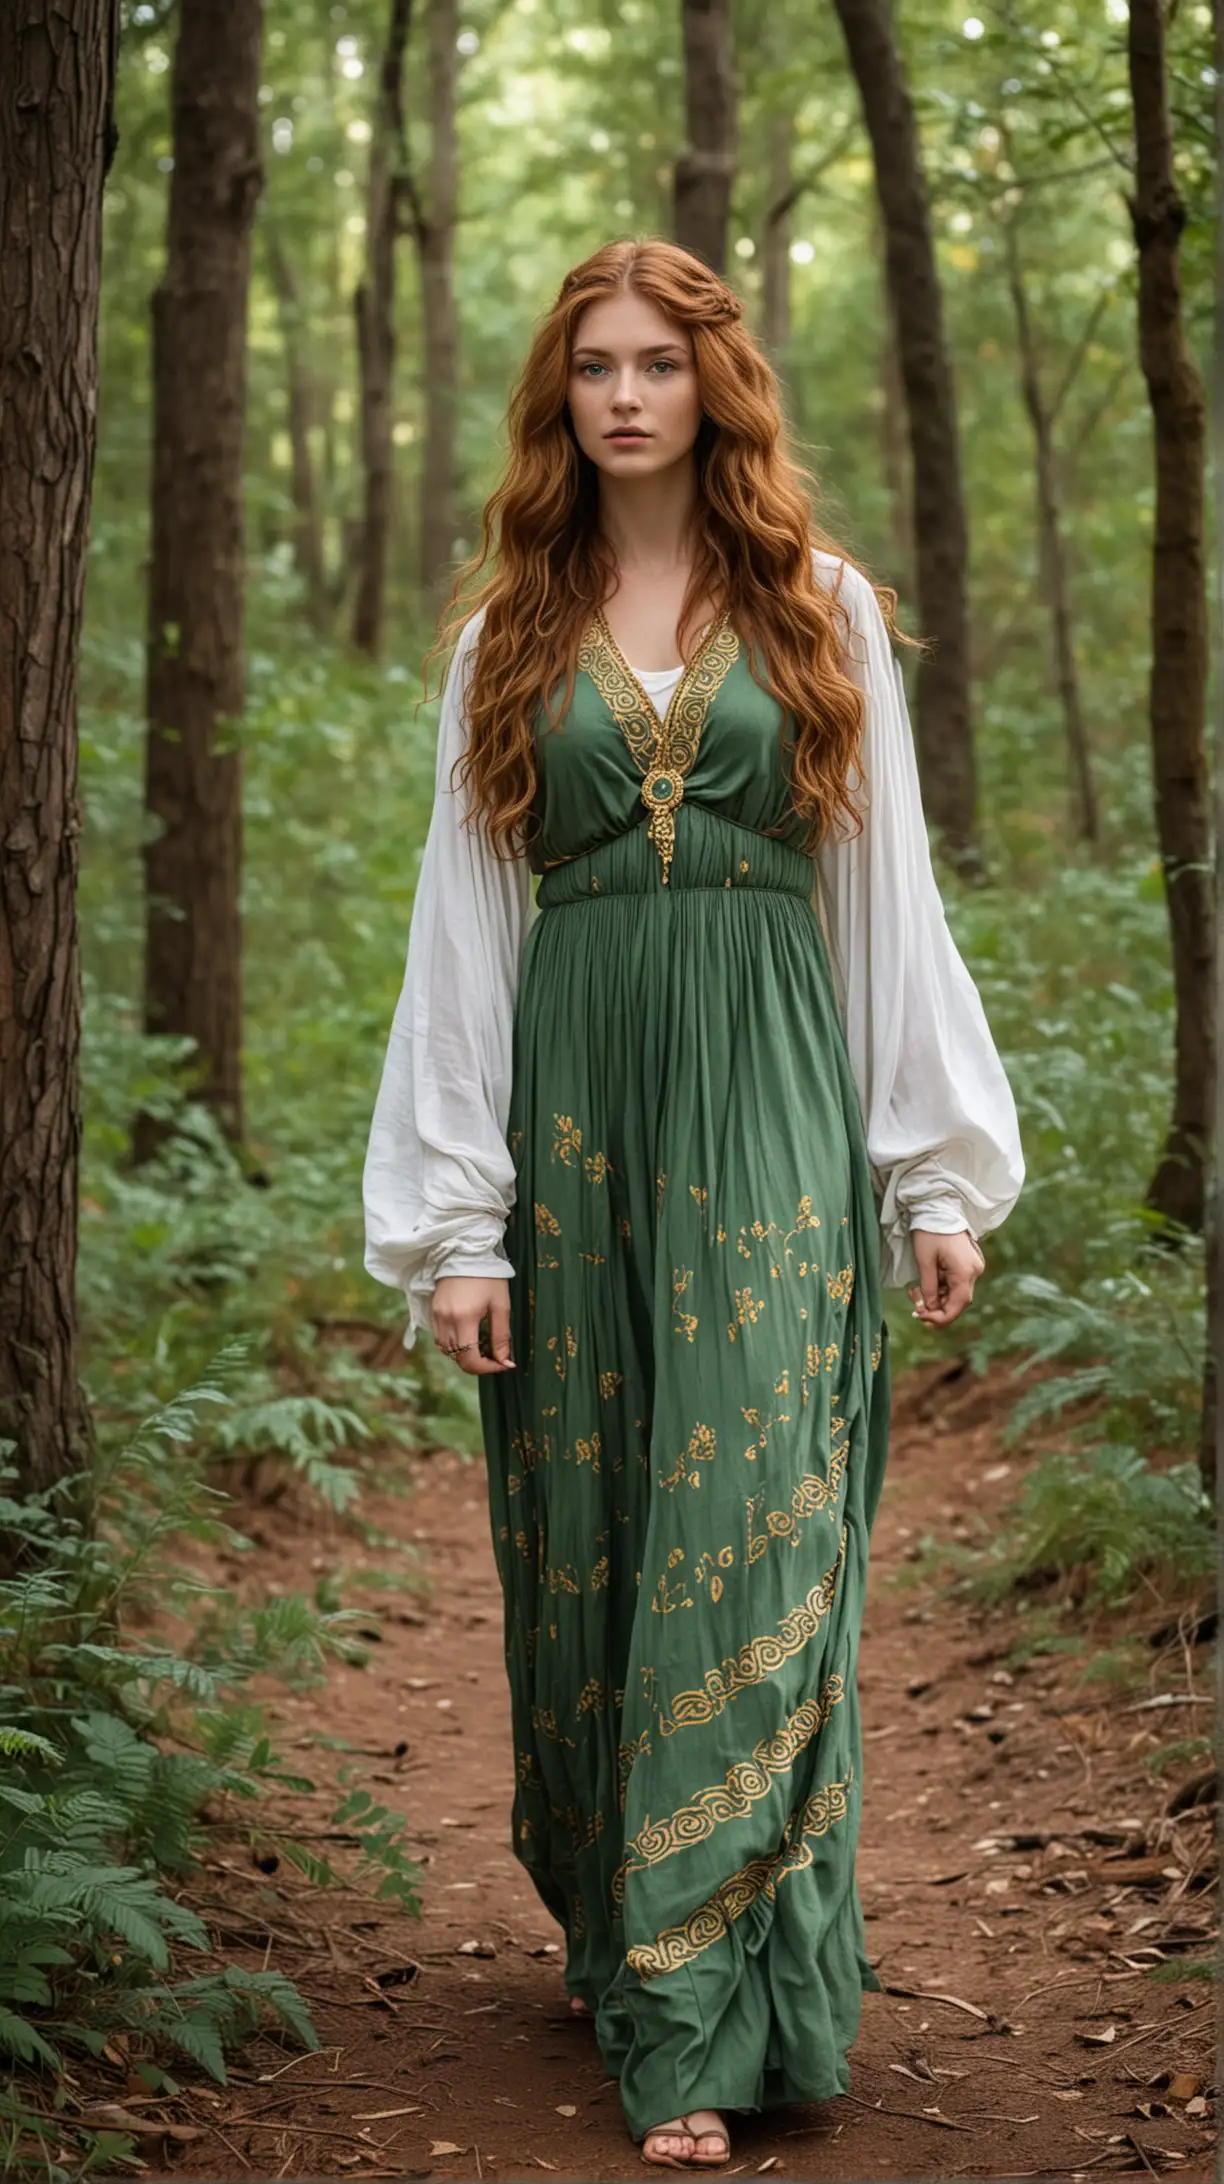 18-year-old girl Julie Roberts with long, wavy auburn hair, and intense green eyes. She is wearing an ancient Greece dress while walking in a forest